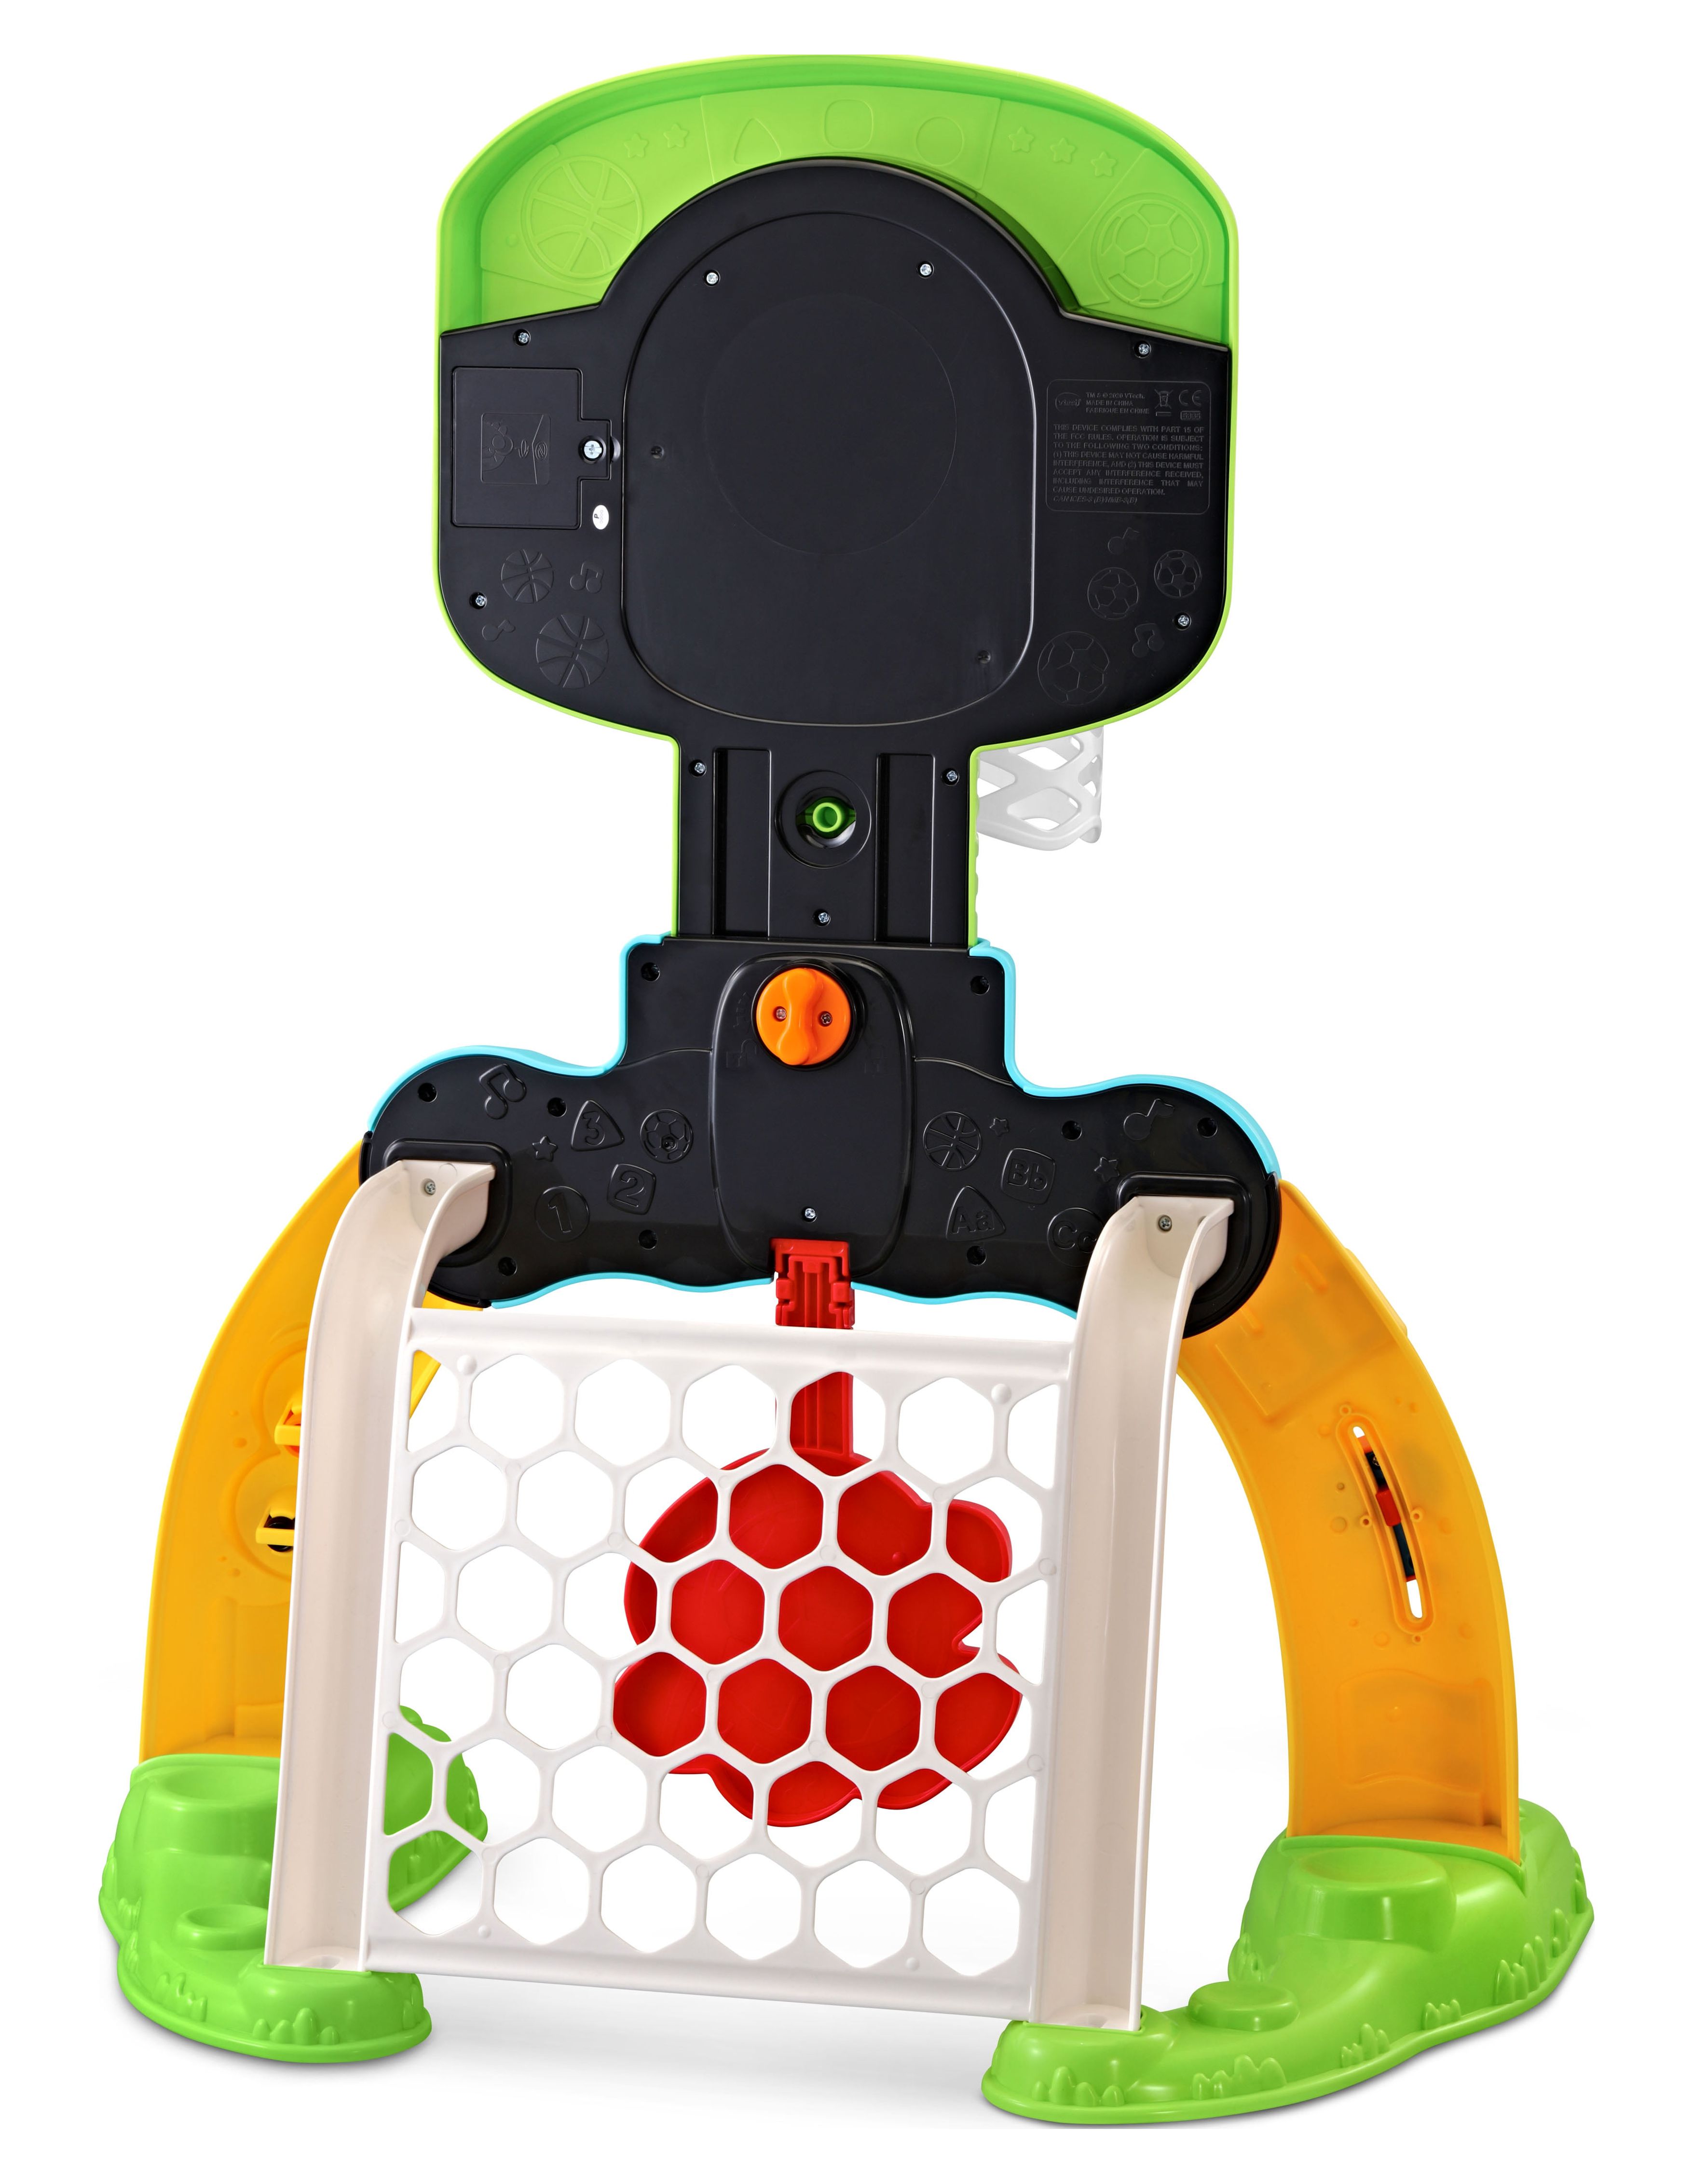 VTech Count & Win Sports Center, Basketball and Soccer Toy for Toddlers, Teaches Physical Activity - image 12 of 13